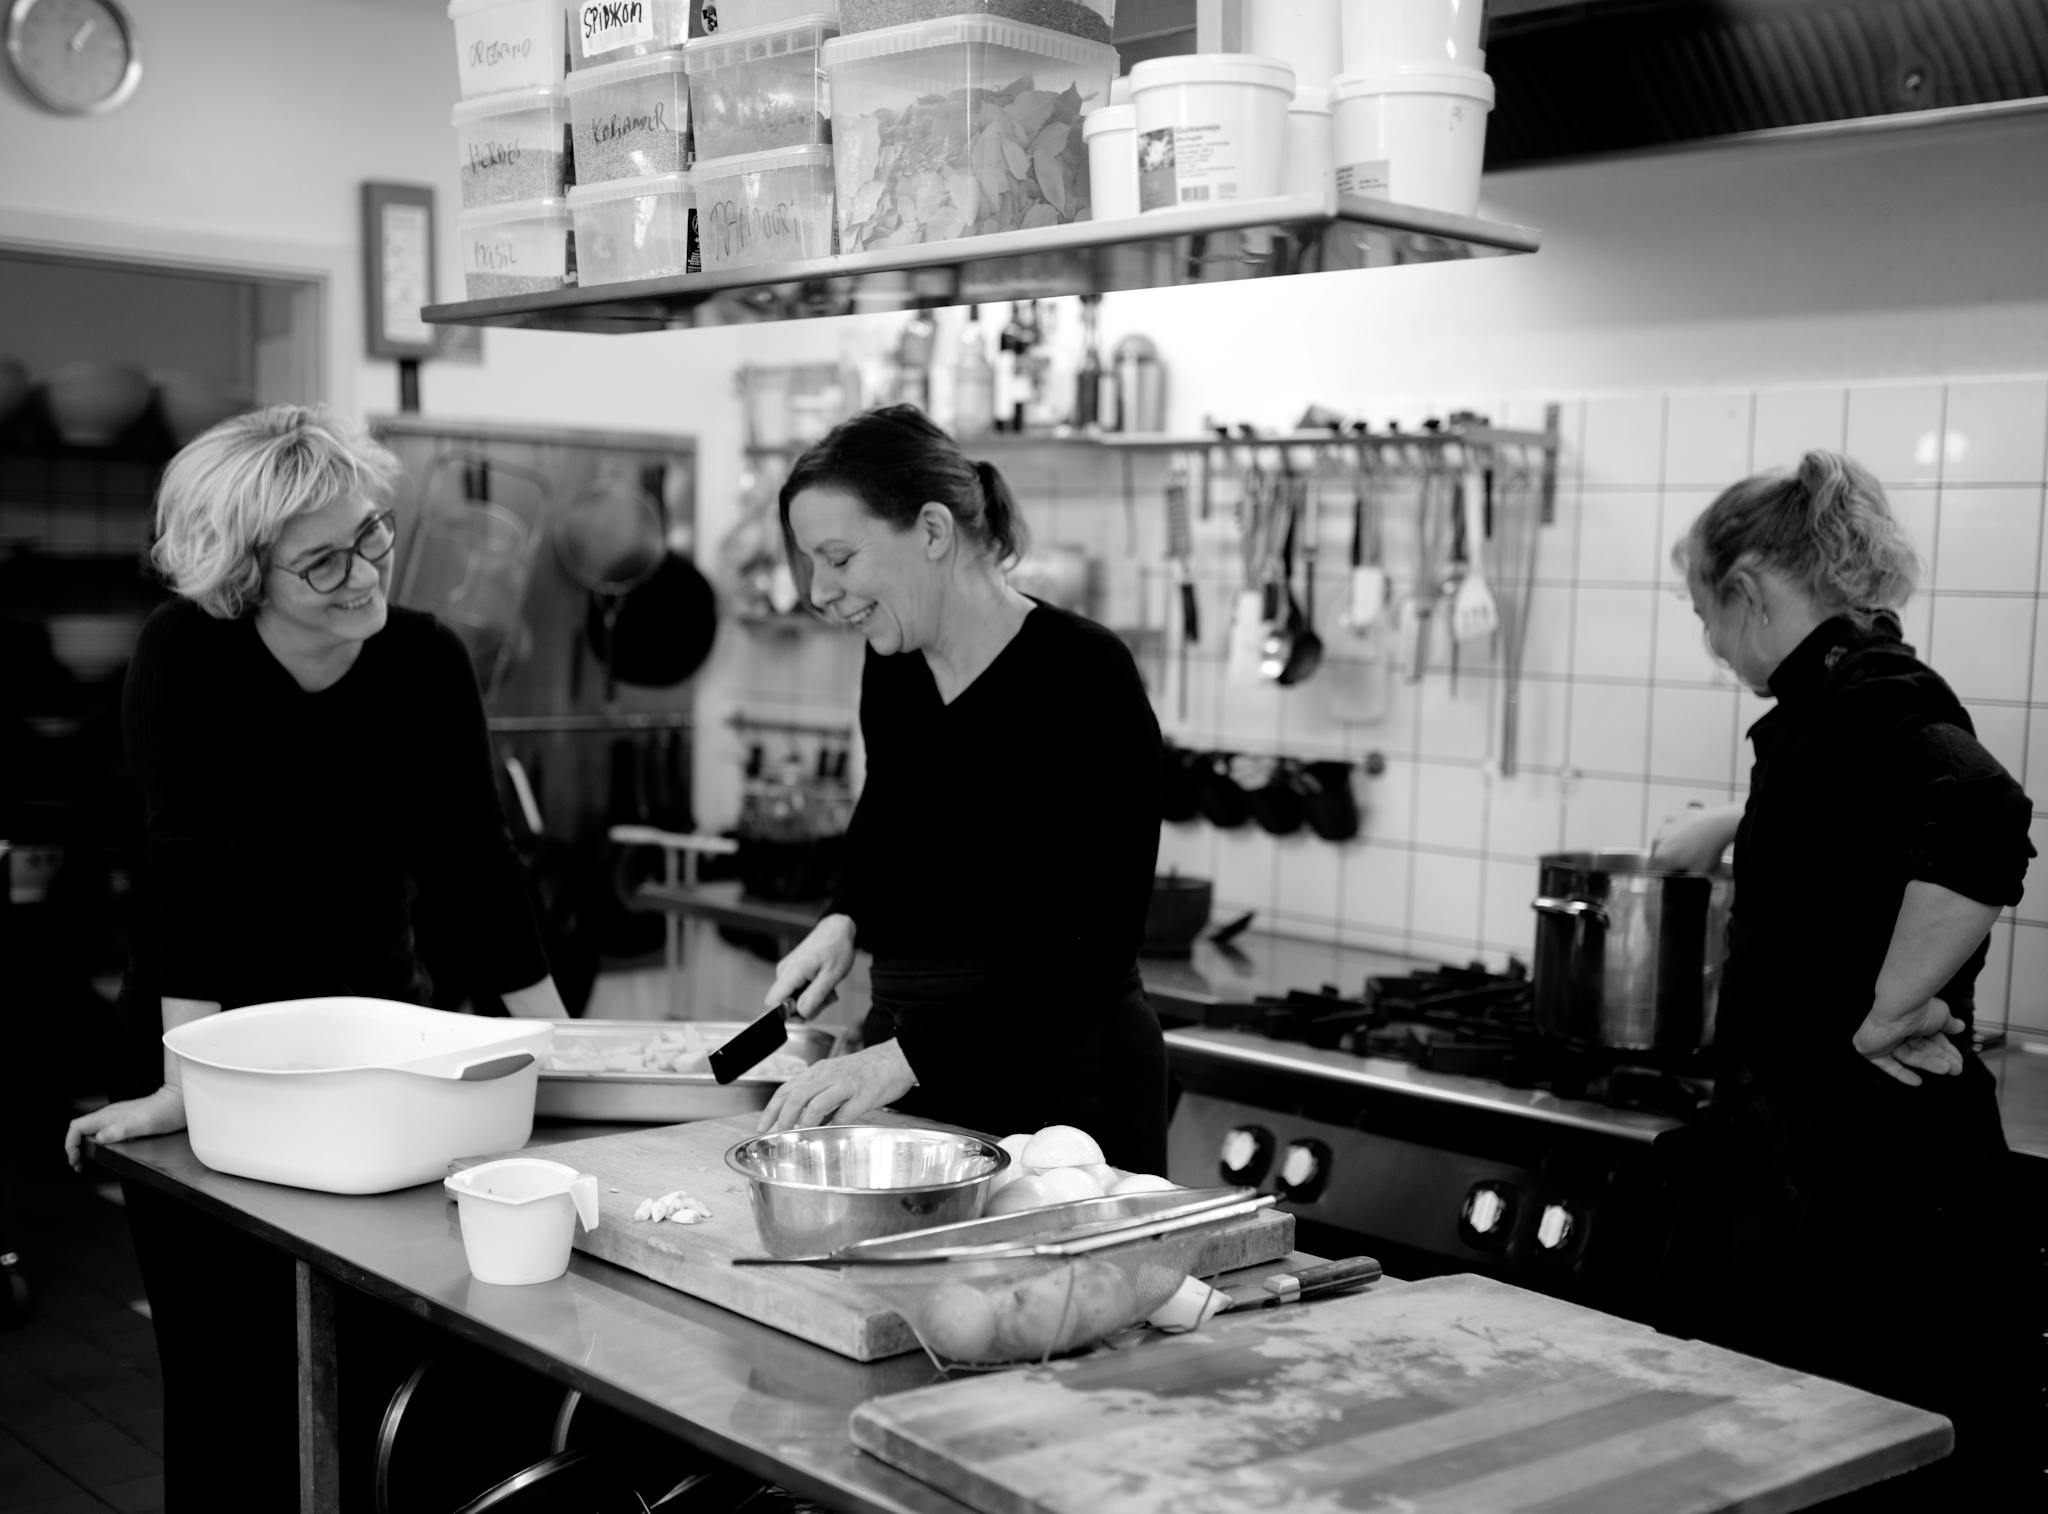 Black and white company of female cooks preparing food in kitchen of cafe while interacting and smiling